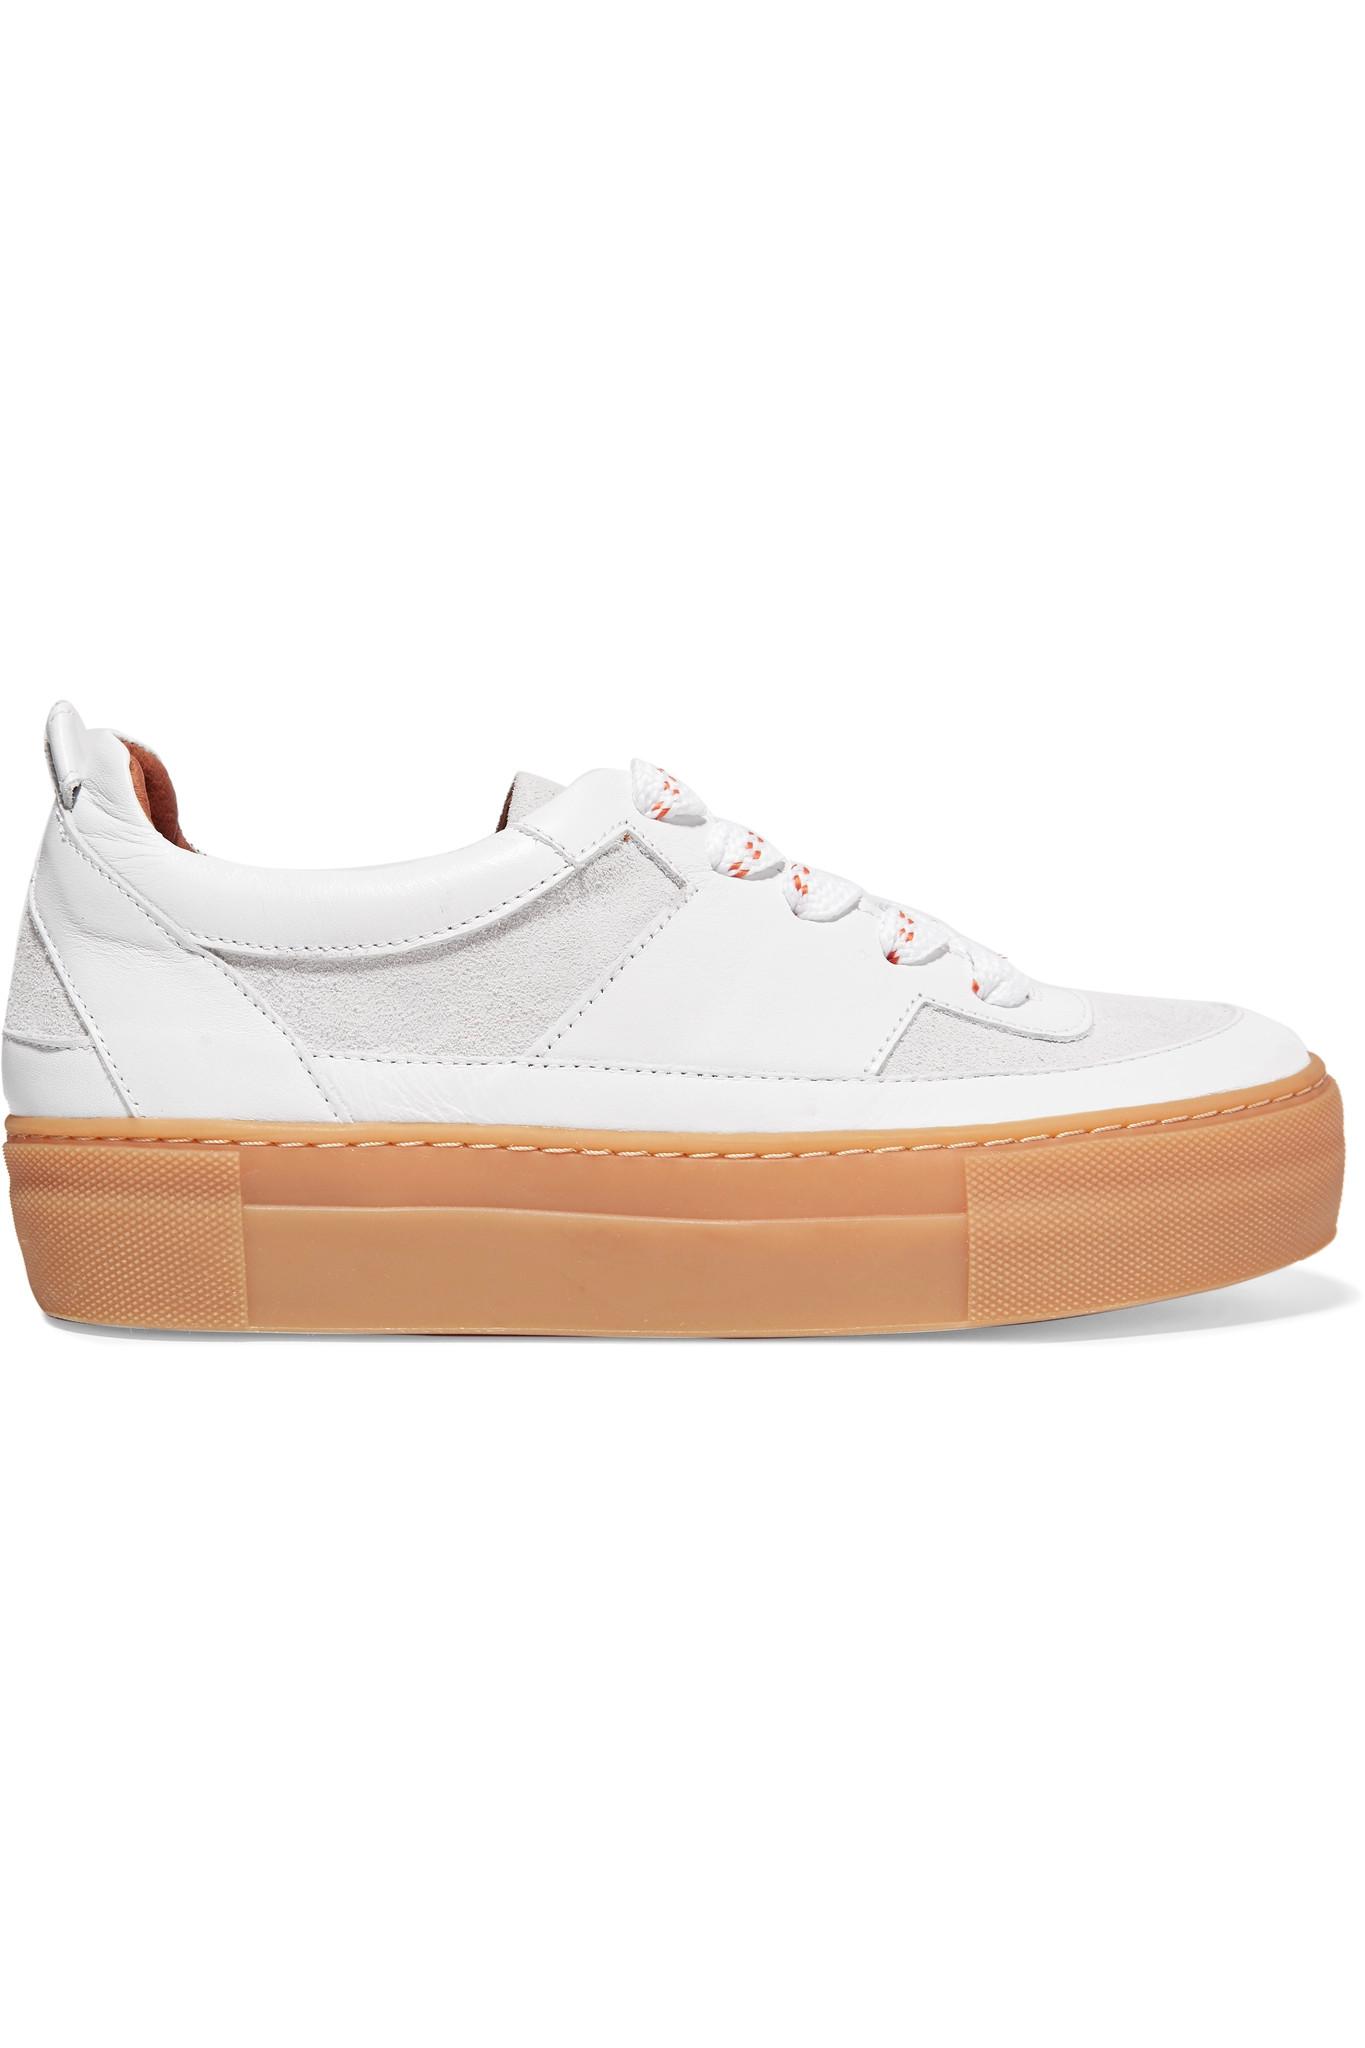 Ganni Corinne Suede And Leather Sneakers in White - Lyst